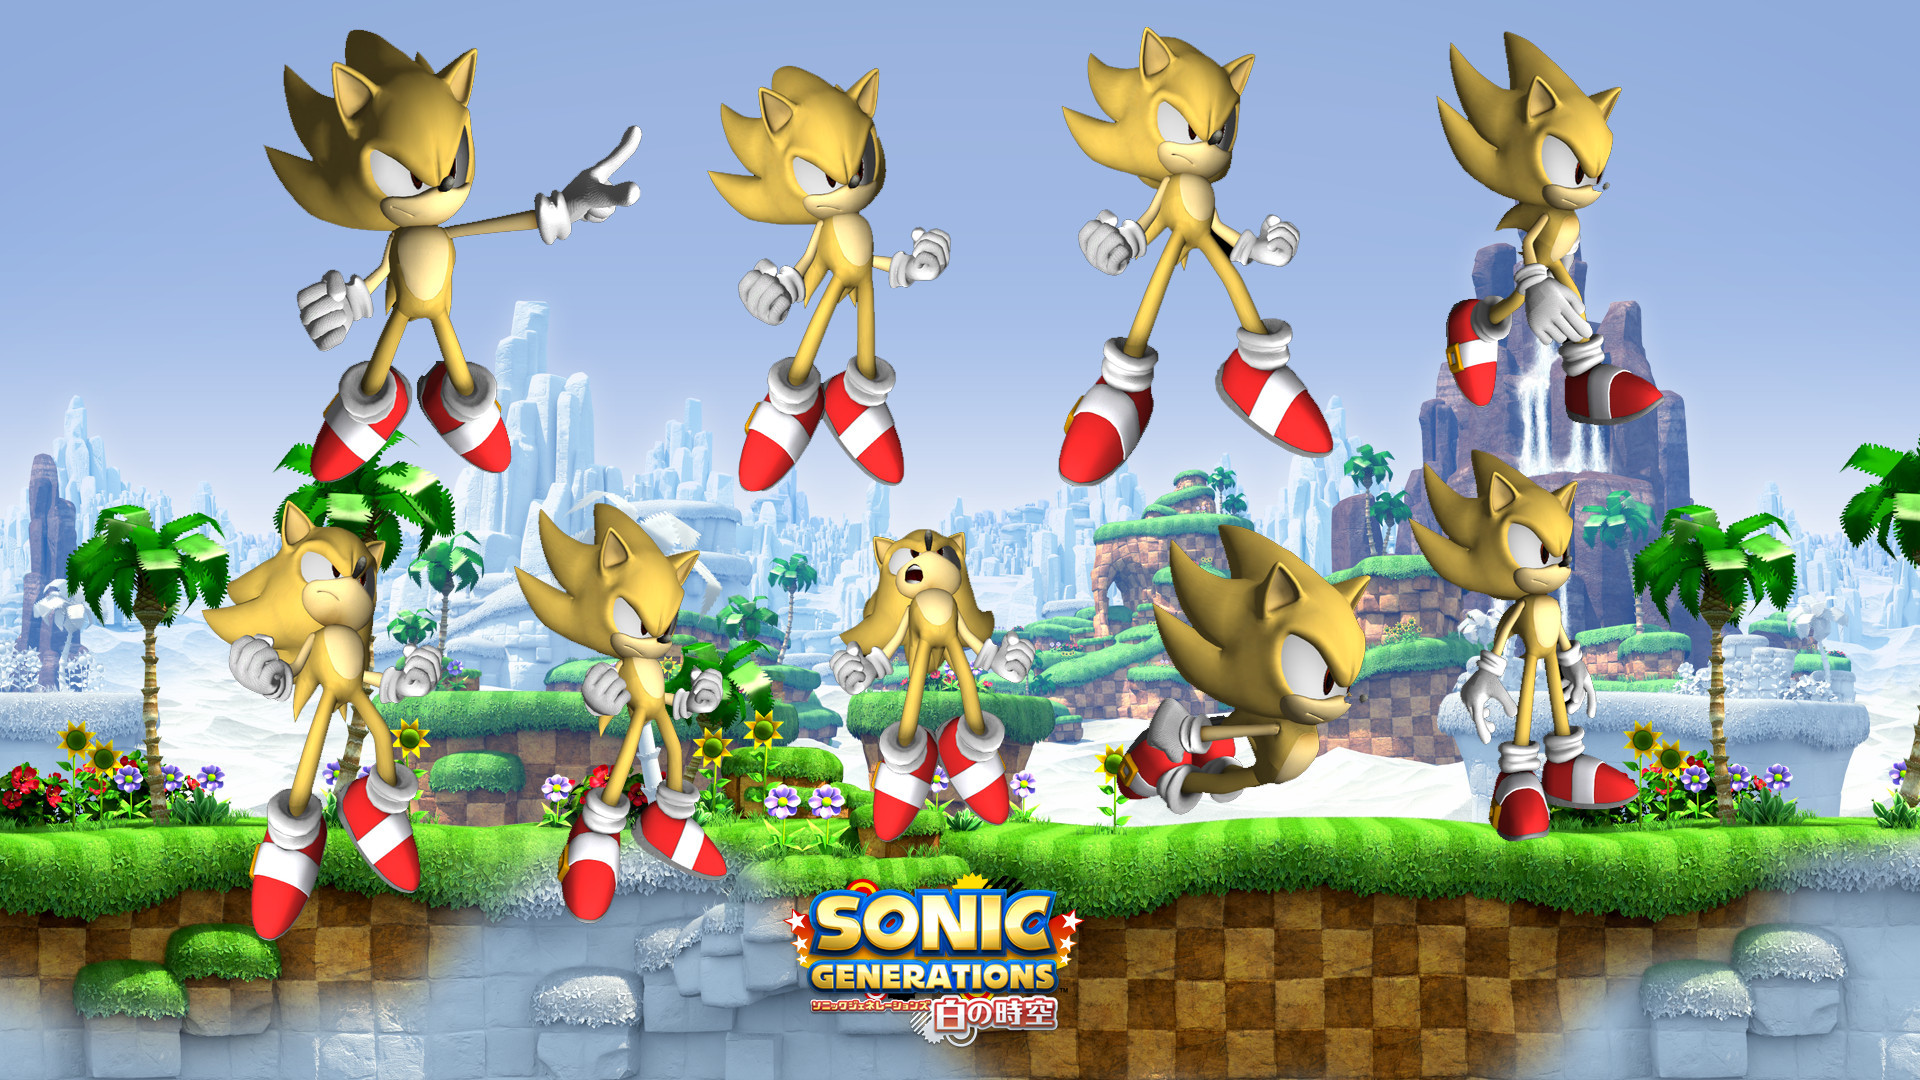 1920x1080 SONIC GENERATIONS WALLPAPER 11 by SONICX2011 SONIC GENERATIONS WALLPAPER 11  by SONICX2011